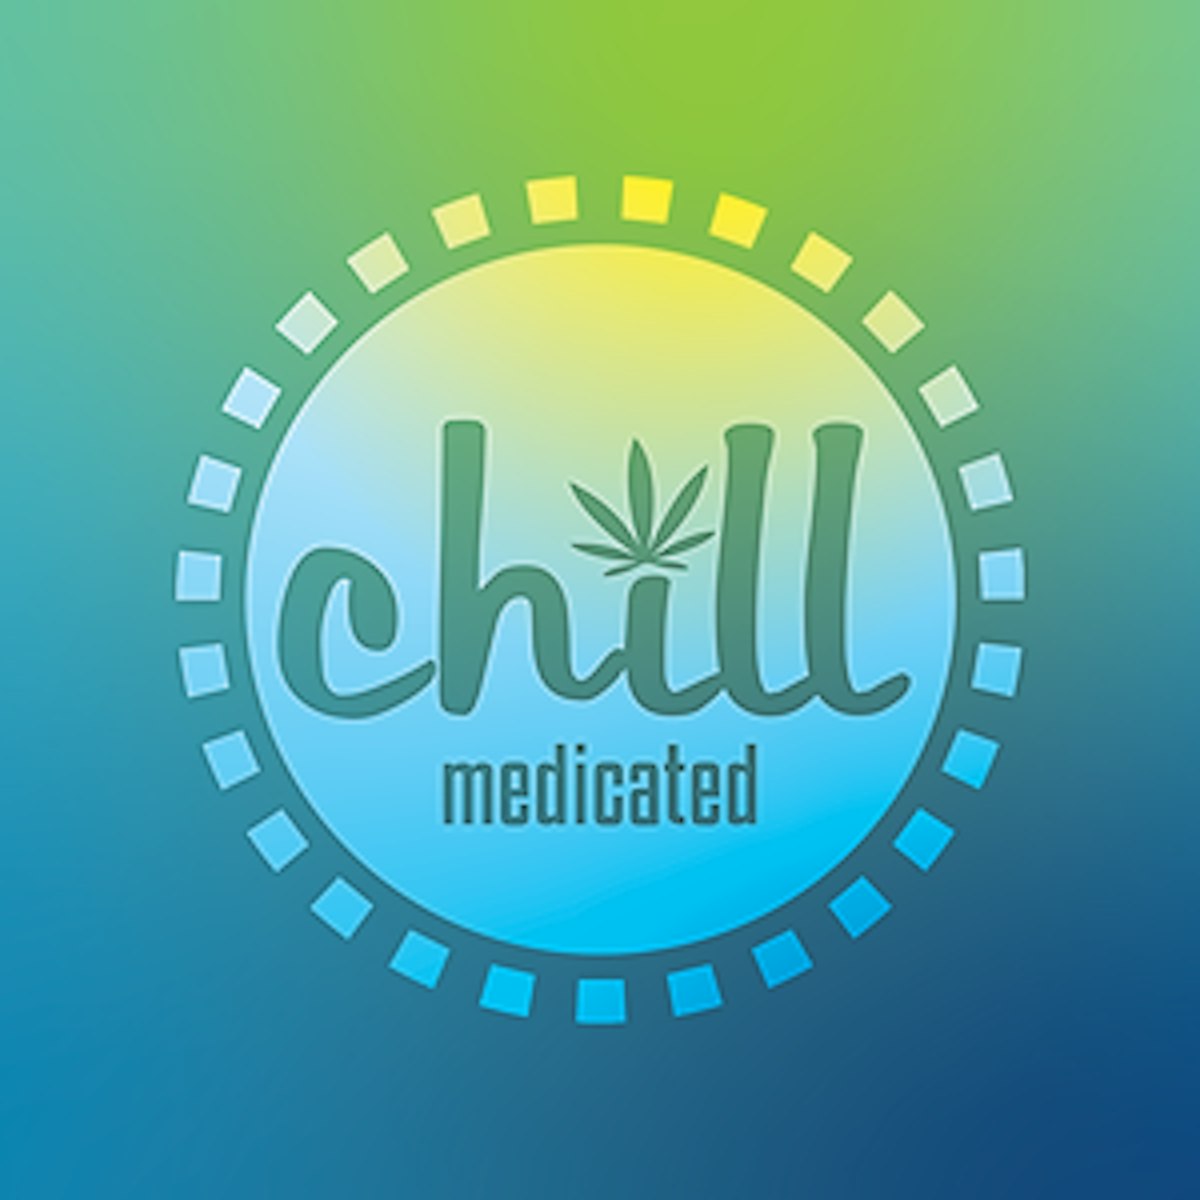 https://leafly-public.imgix.net/brands/logos/o9Lk4fWYRBiXVI54V2mD_Chill-Medicated_Square-(1).png?w=1200&fm=jpg